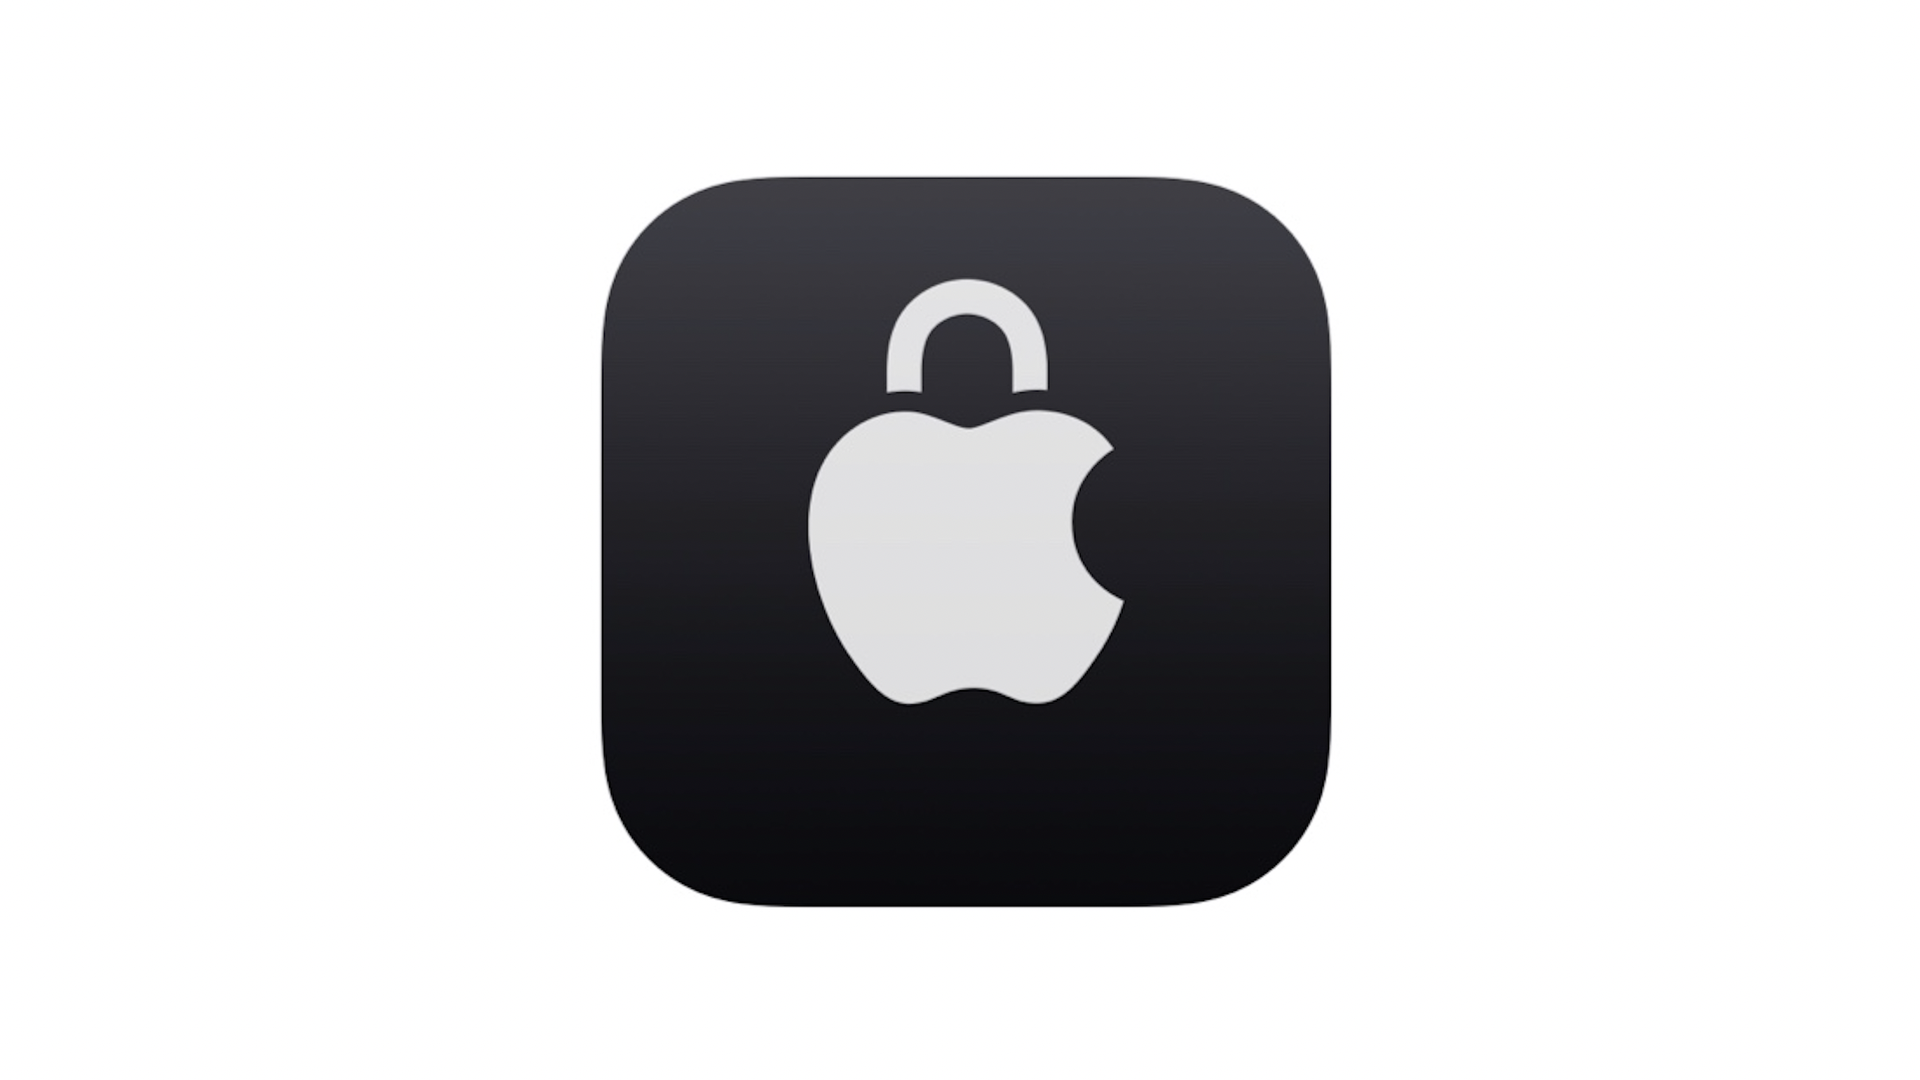 Image of an Apple logo with a lock on it